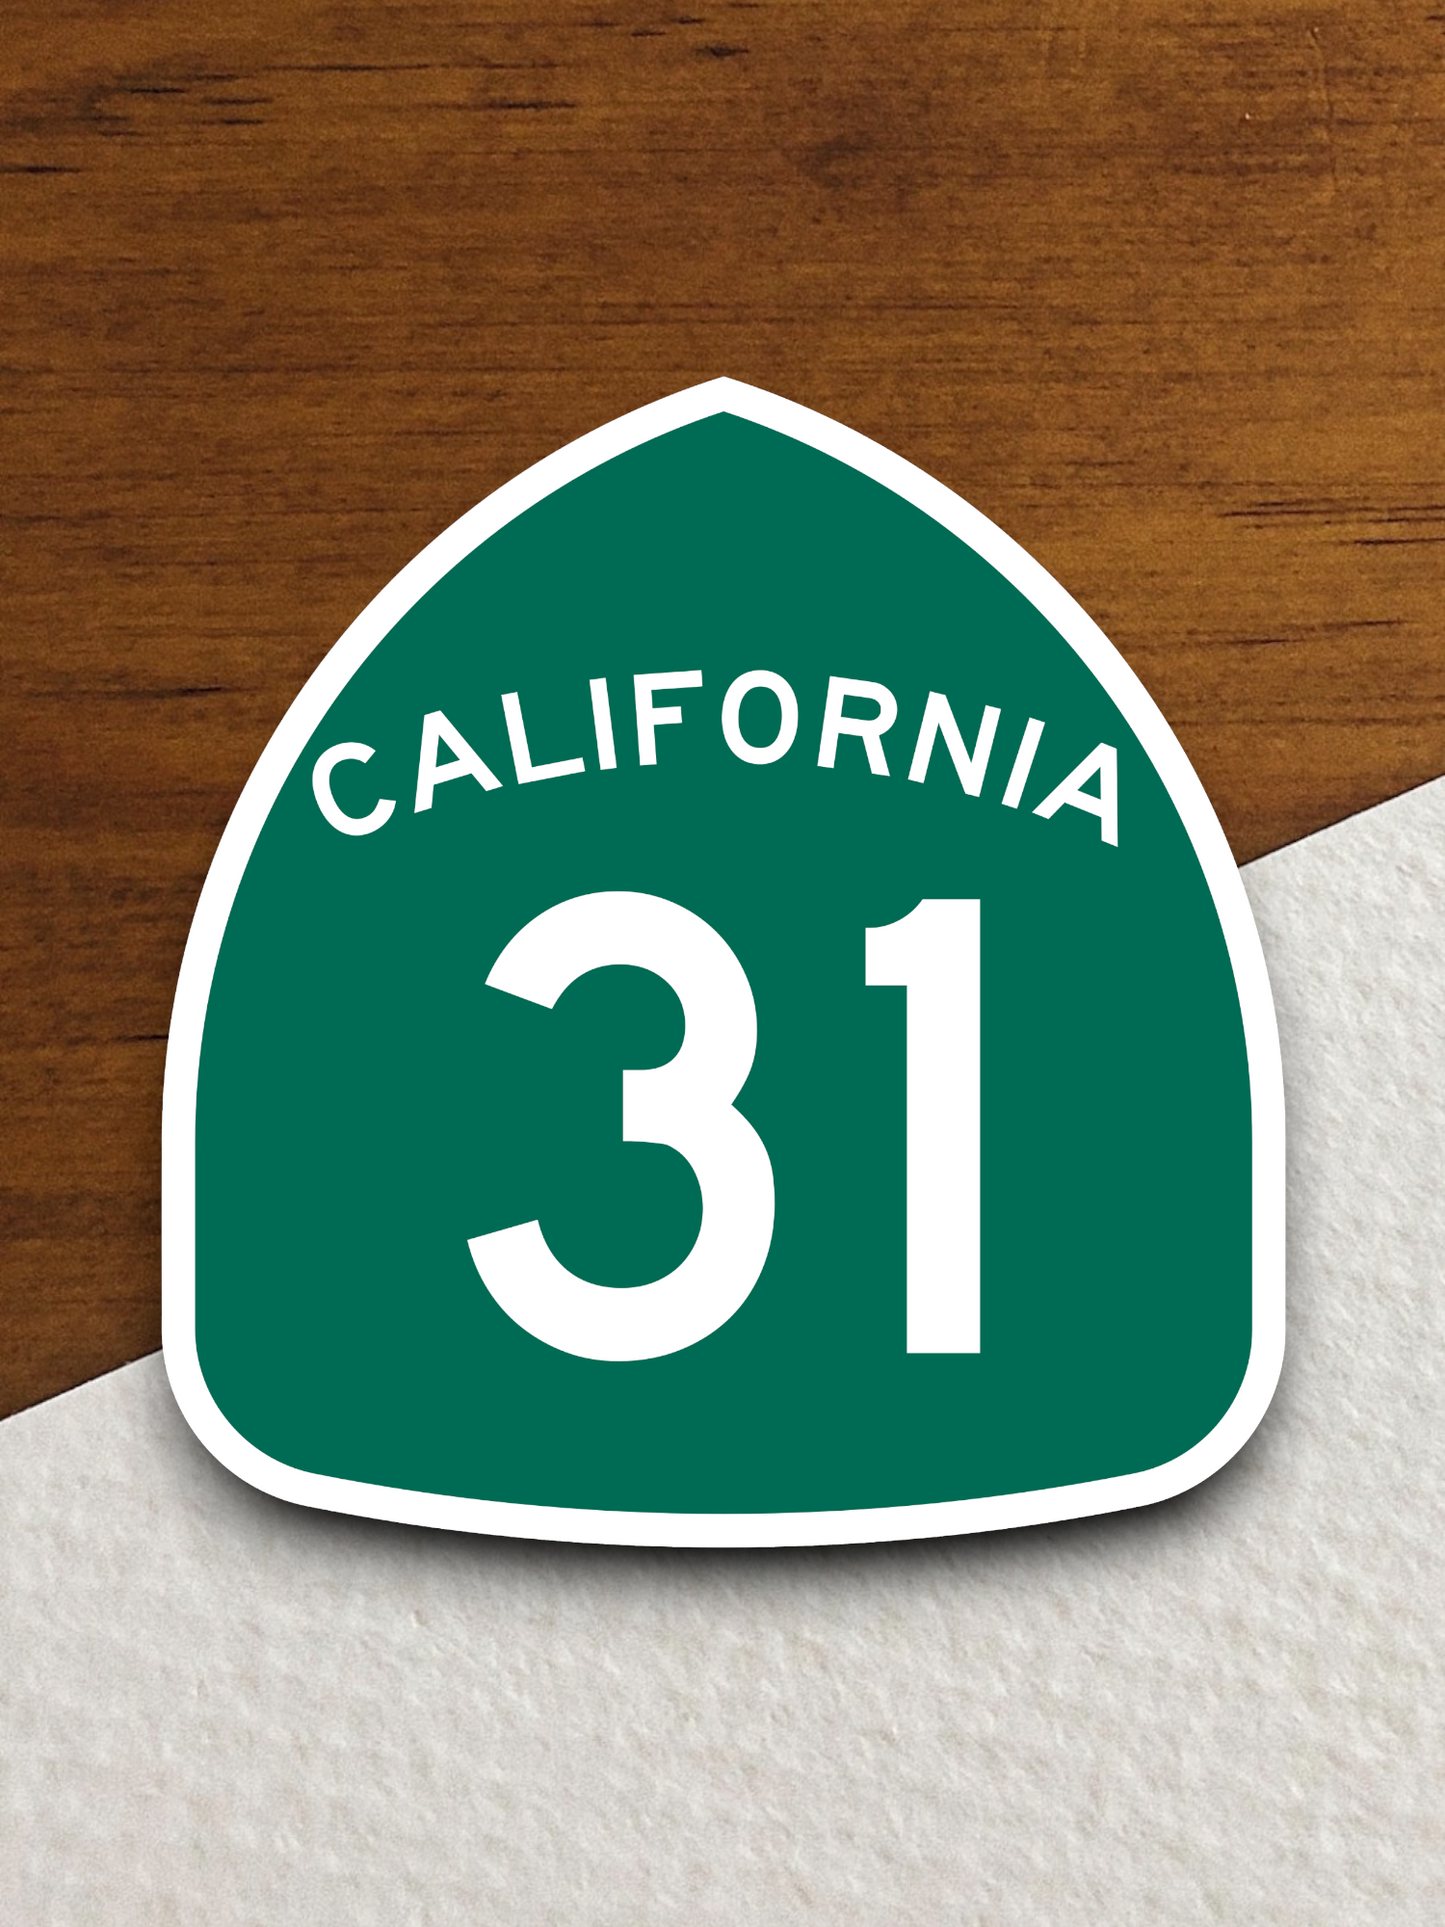 California State Route 31 Road Sign Sticker